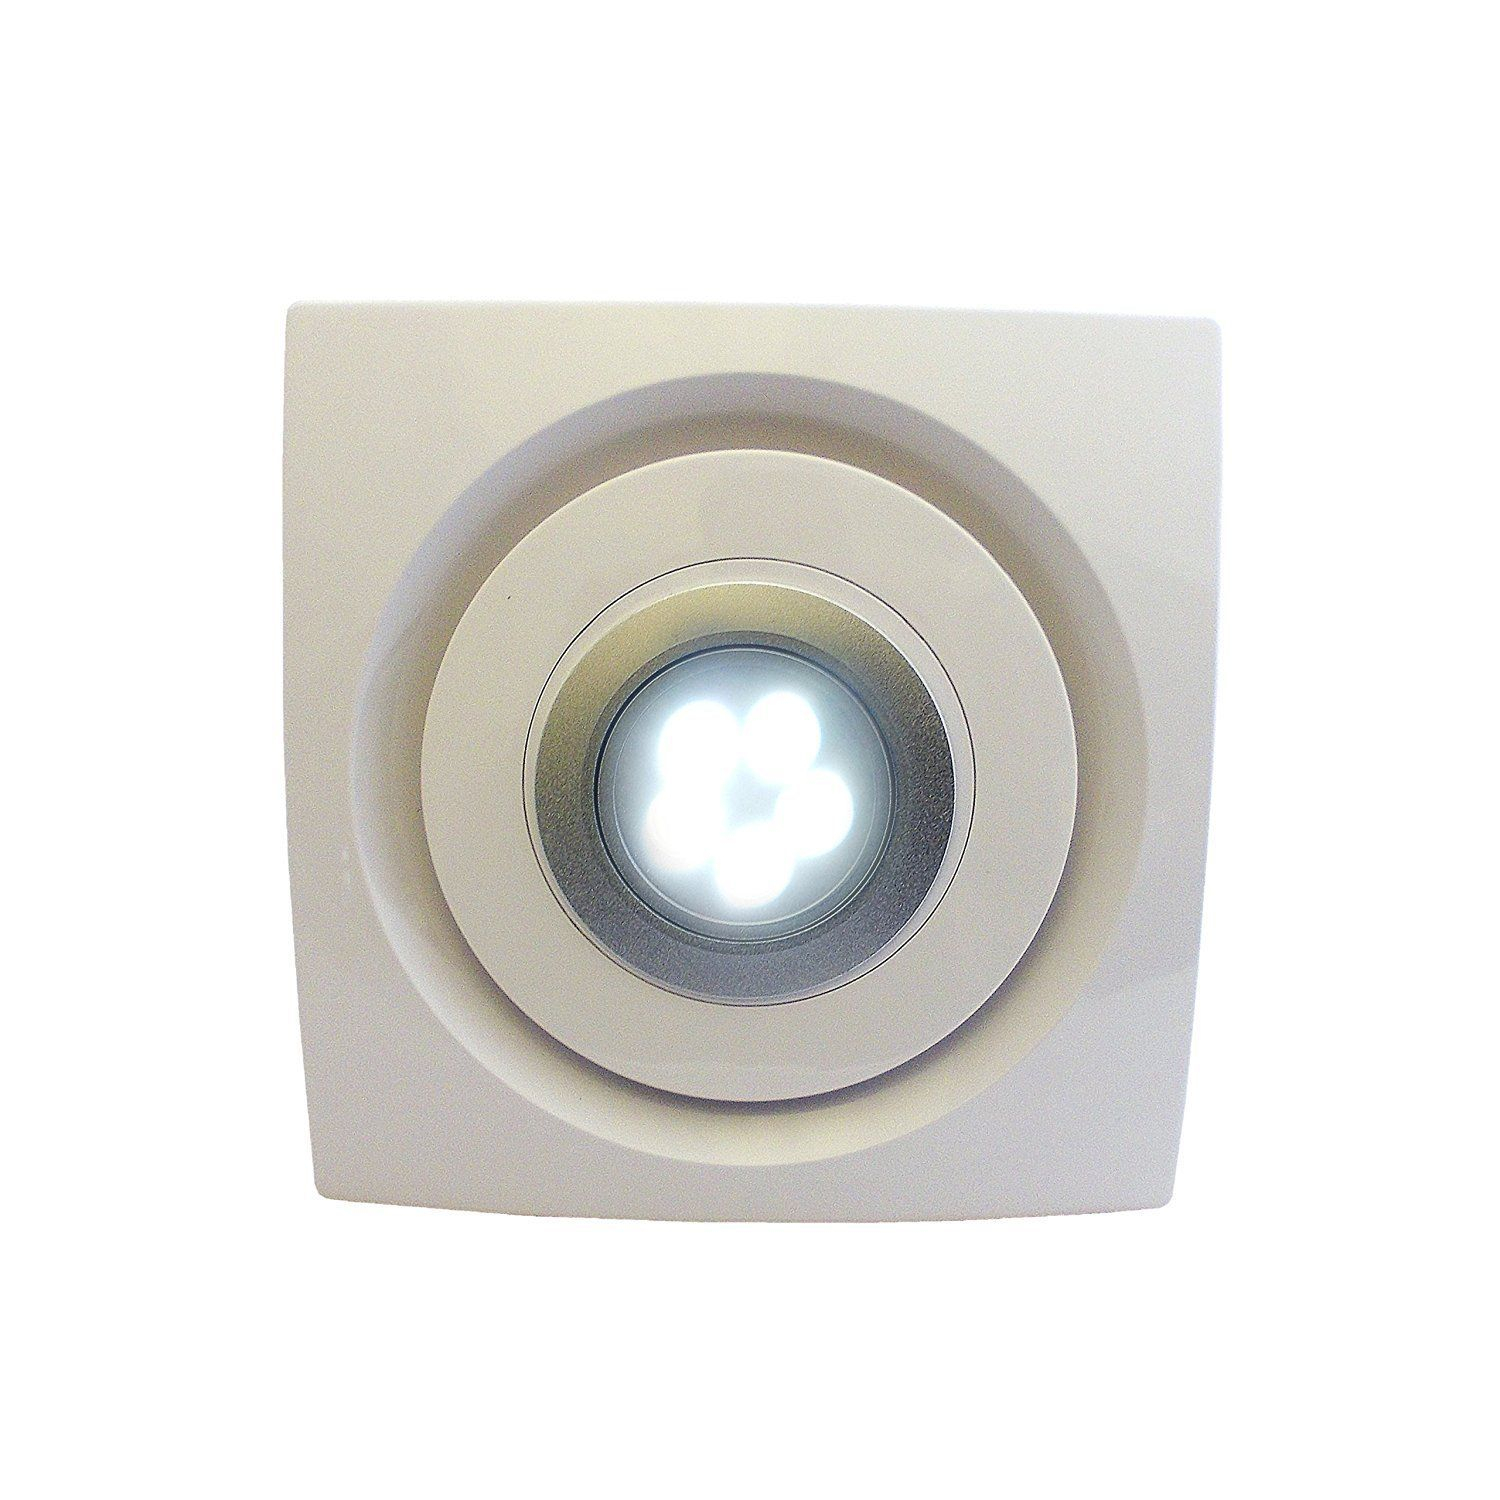 Bathroom Kitchen Ceiling Extractor Fan With Led Light 100mm 4 regarding dimensions 1500 X 1500